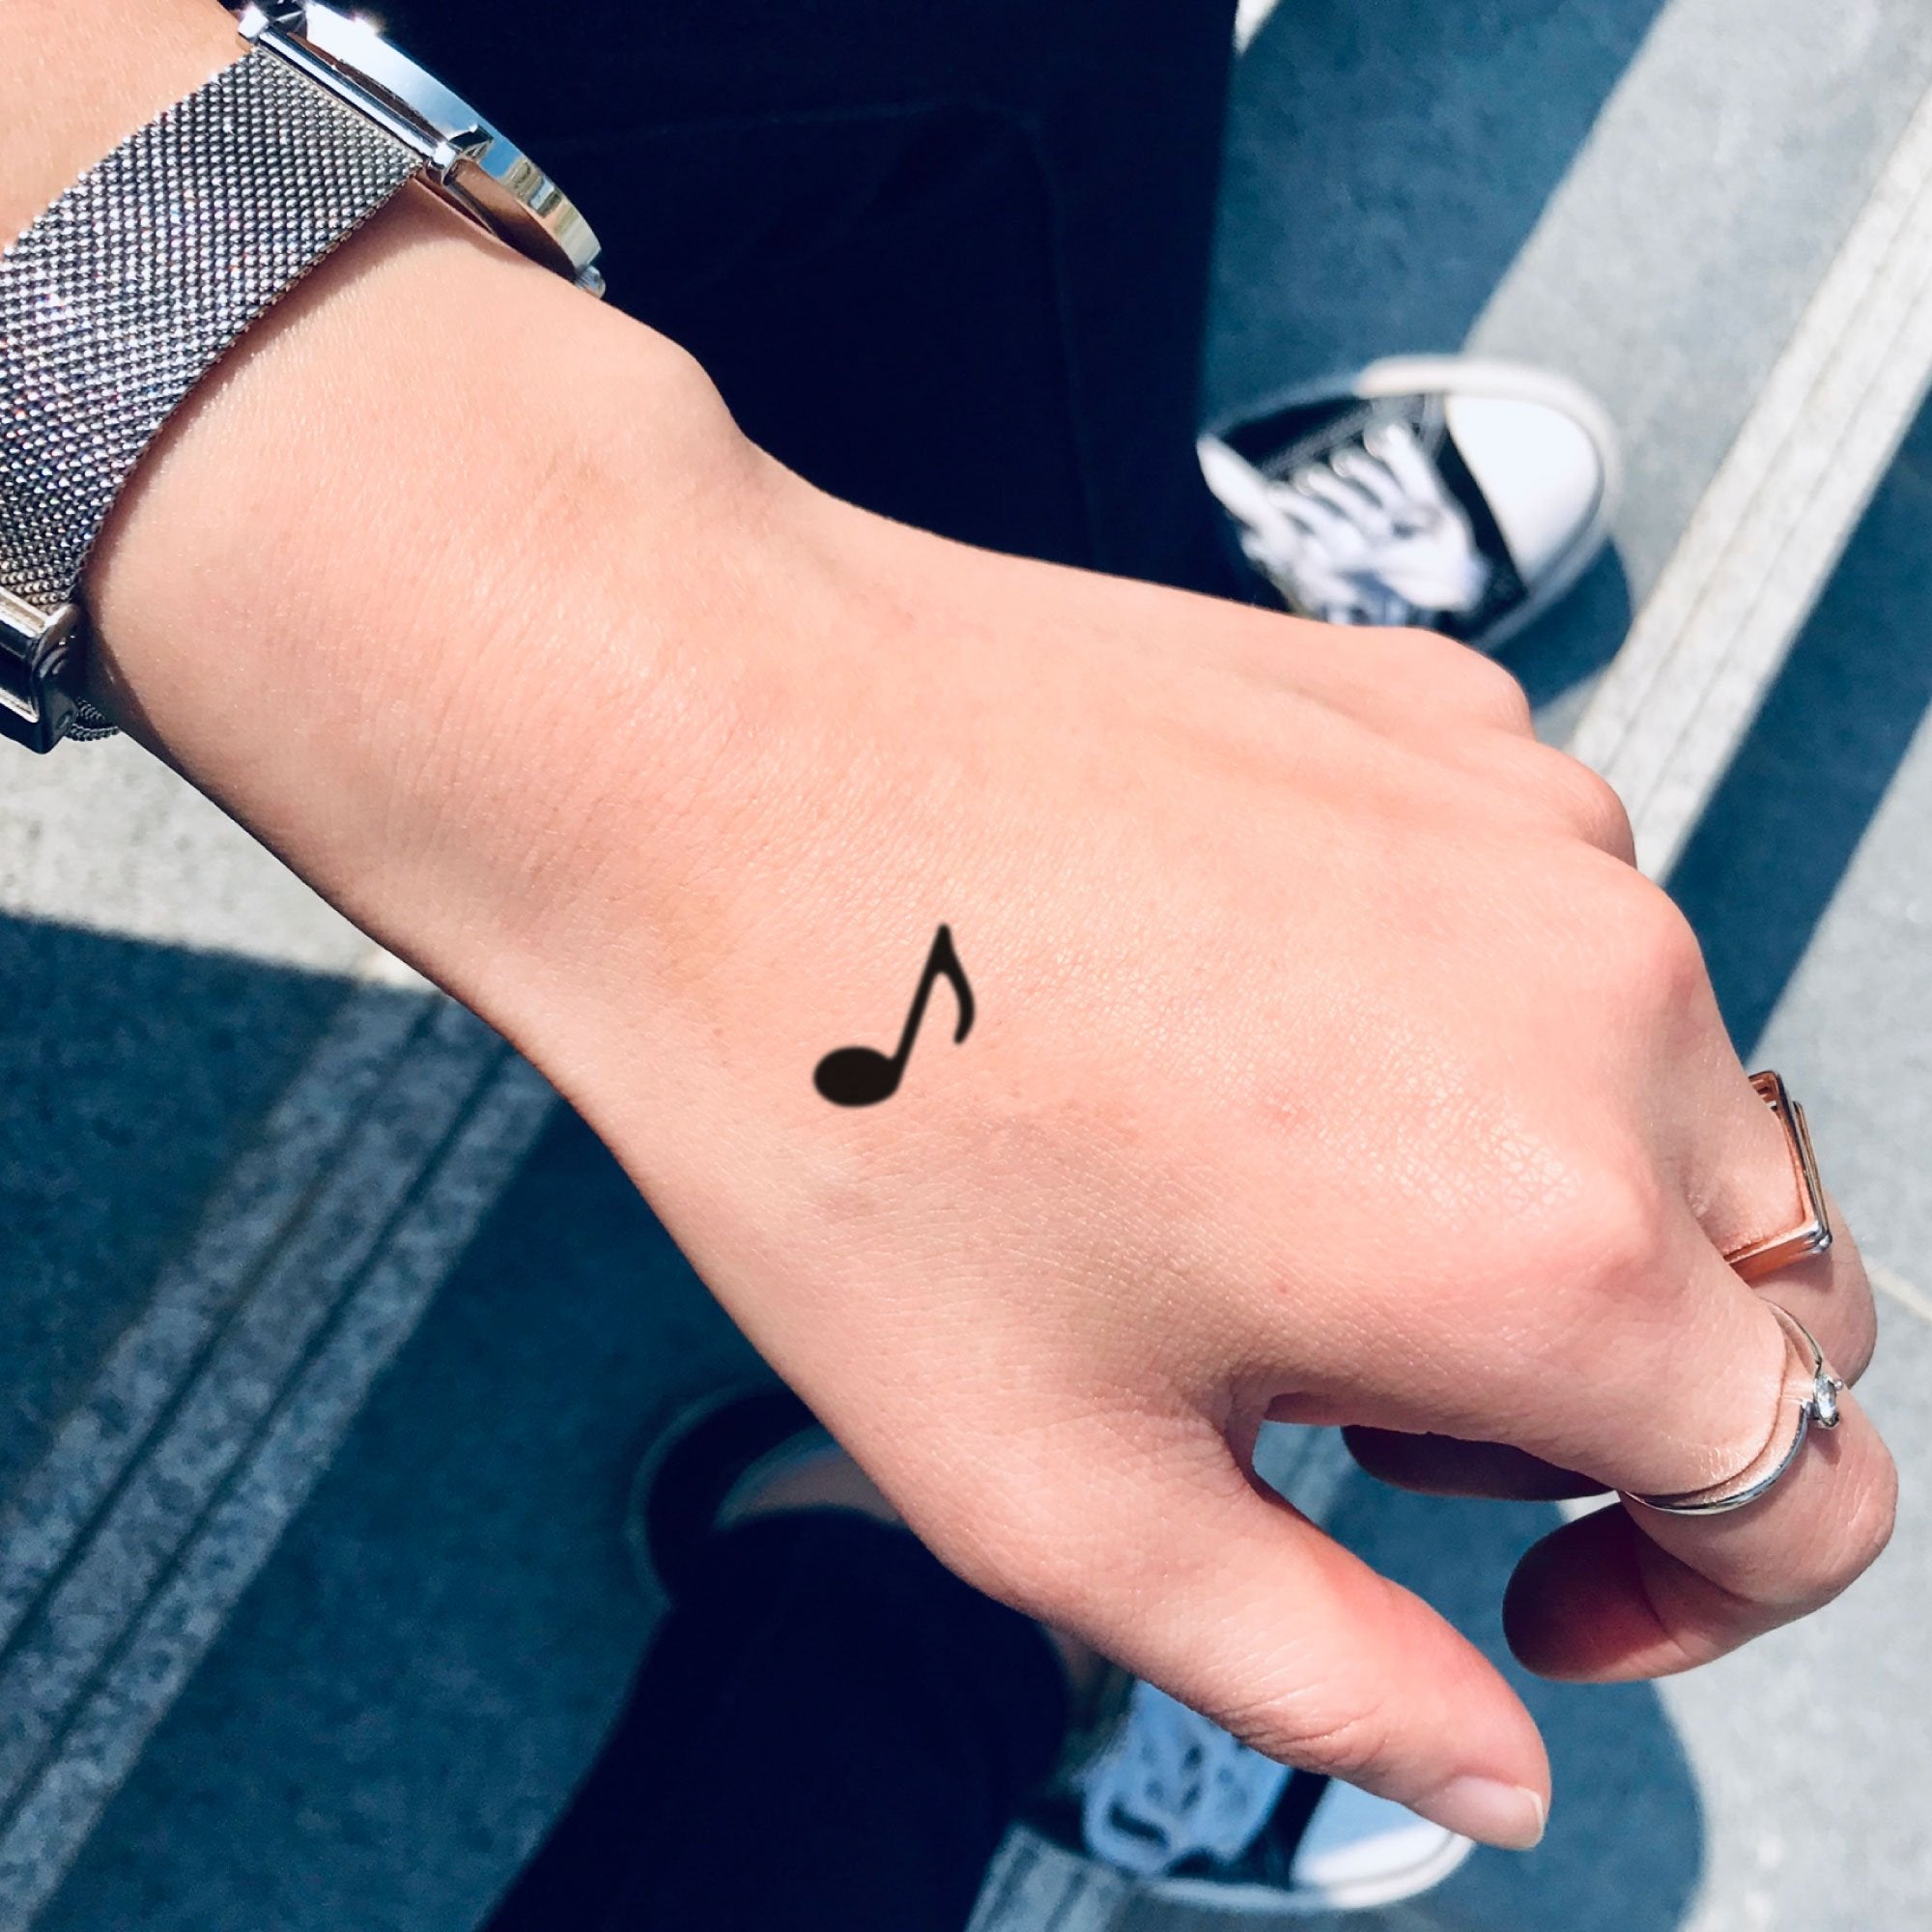 75 Music Note Tattoos For Men - YouTube